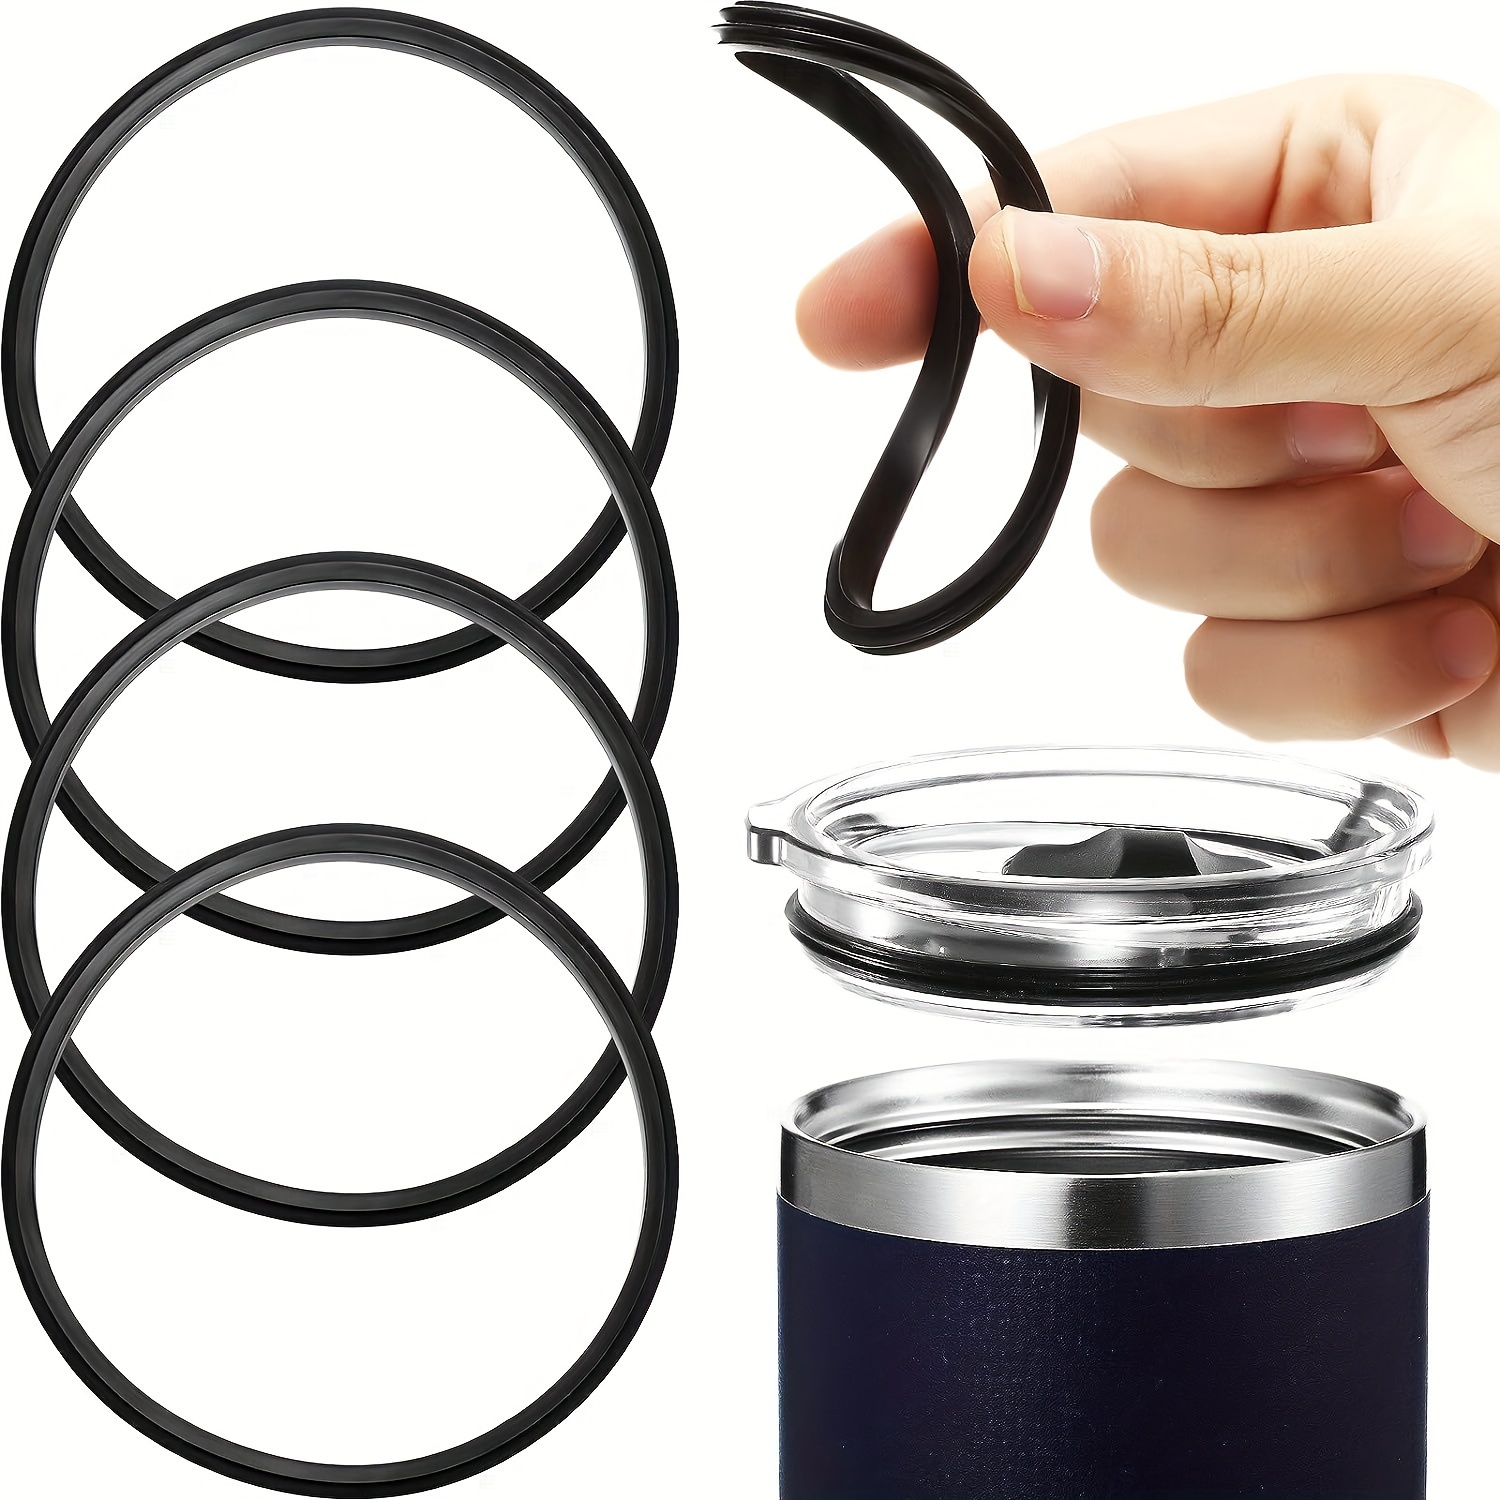 4 Pcs Silicone Sealing Ring Replacement for Contigo Water Cup,Sealing Ring  Travel Cup Cover Gasket Rubber Cover Seals,Black 